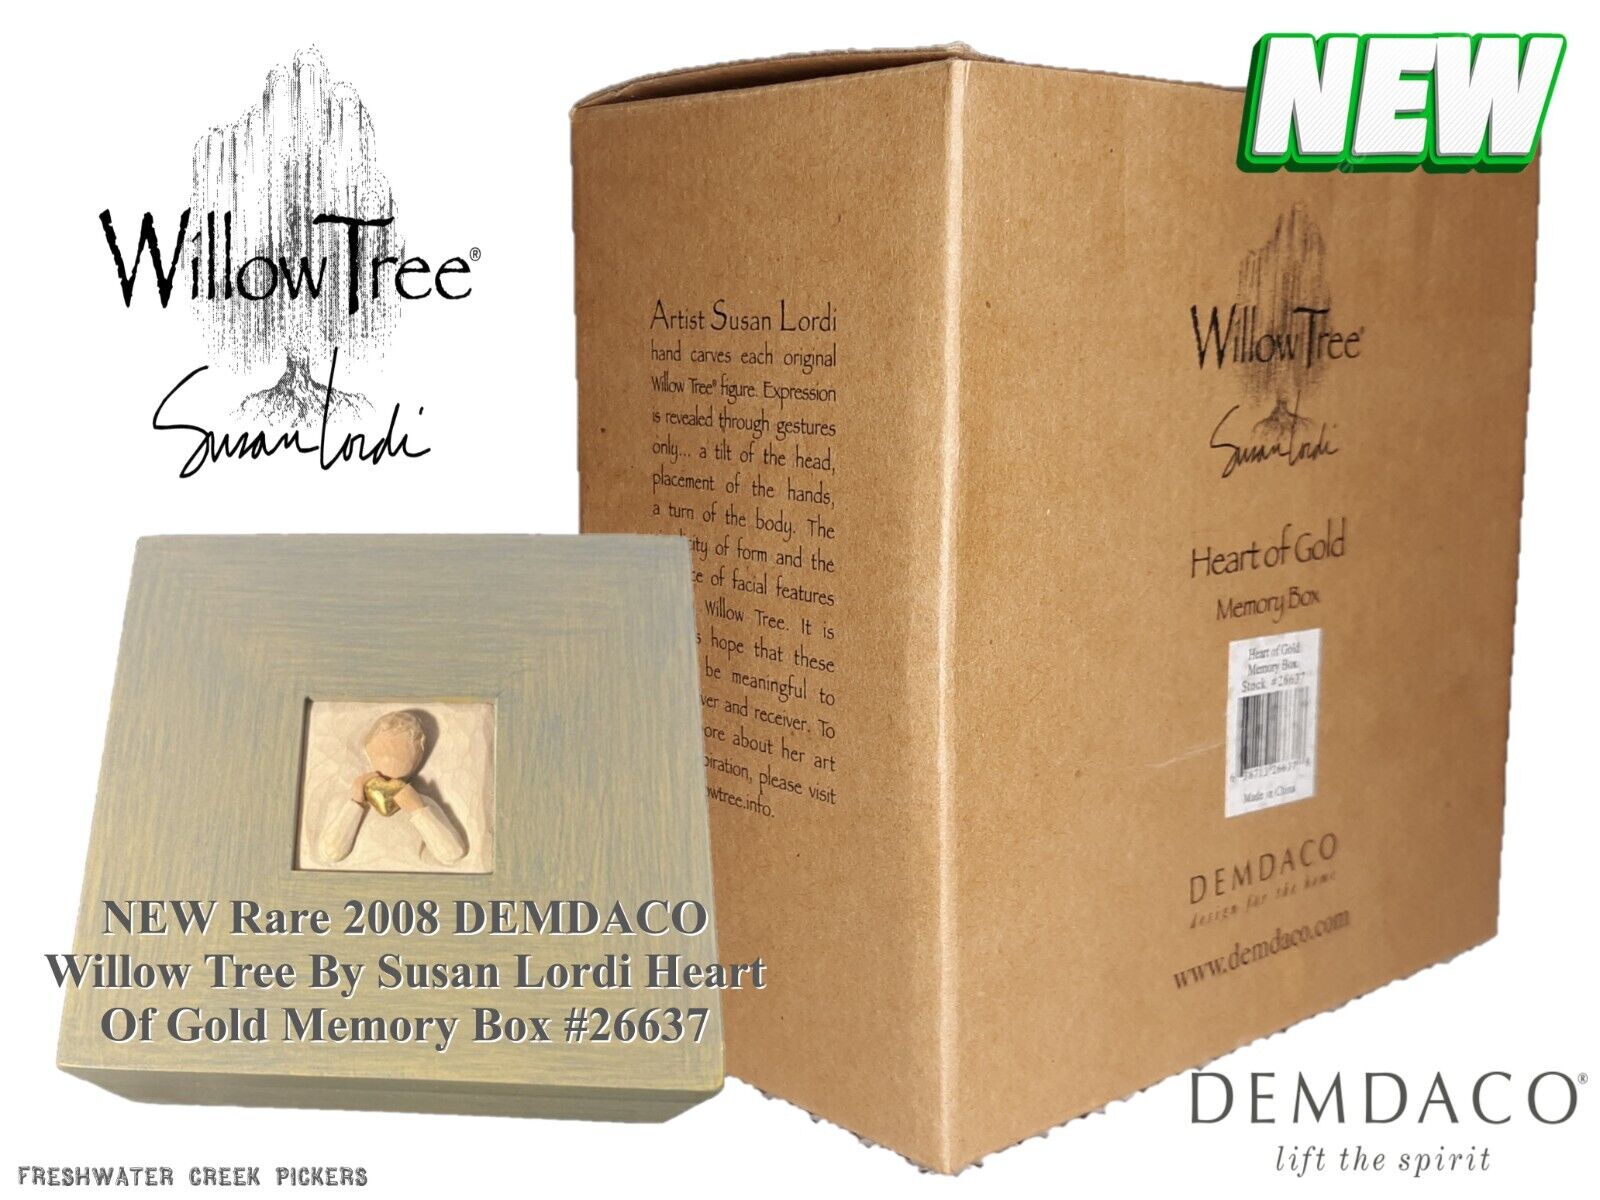 NEW Rare 2008 DEMDACO Willow Tree By Susan Lordi Heart Of Gold Memory Box #26637